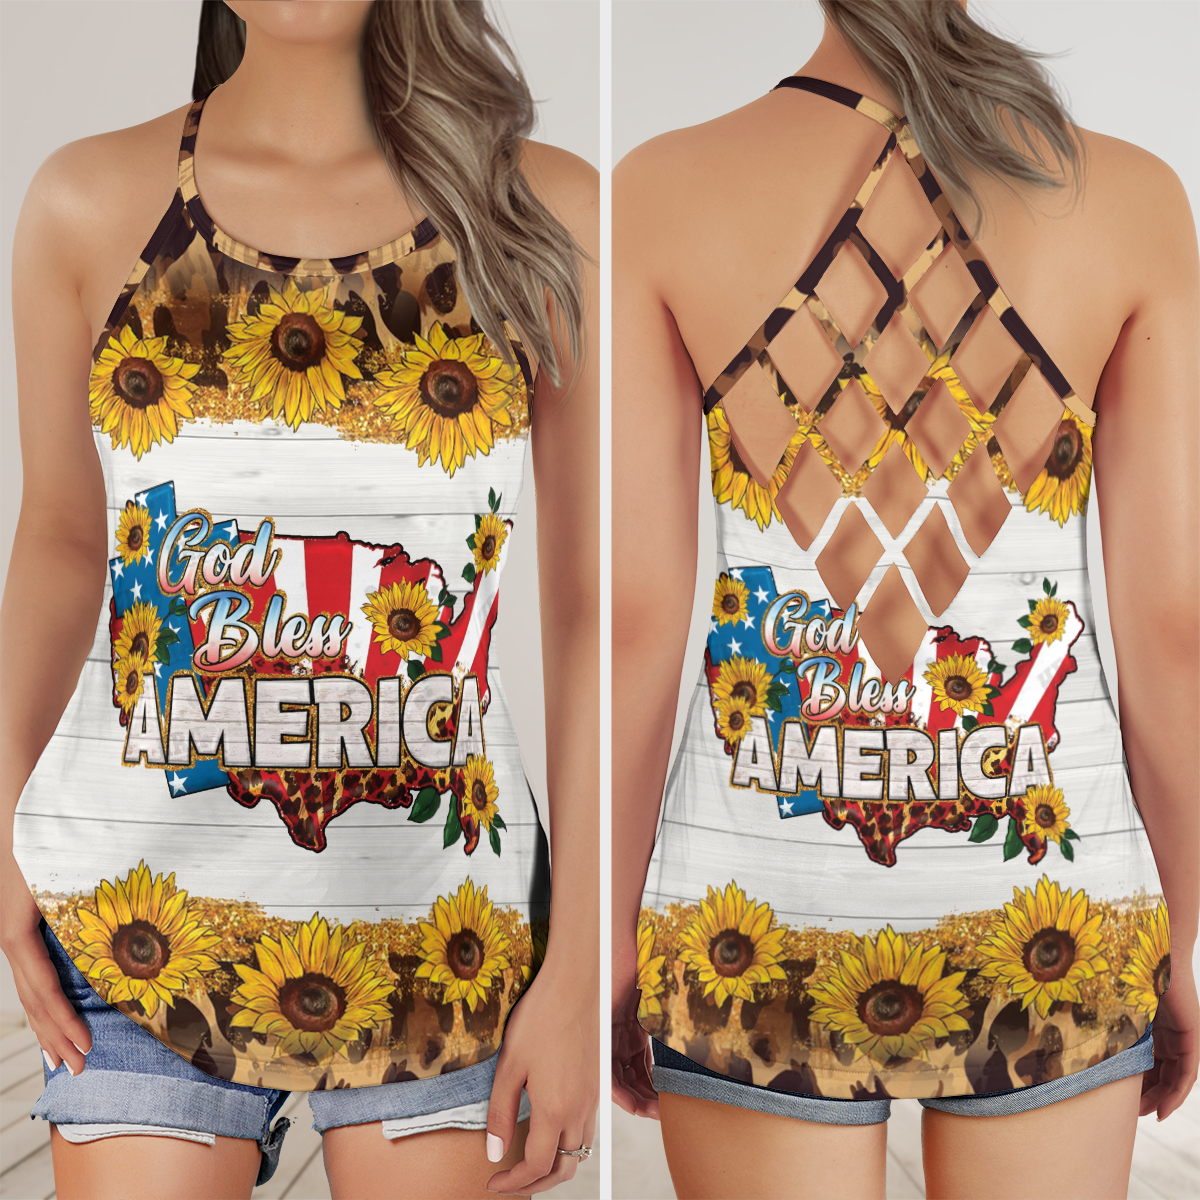 God Bless America Leopard And Sunflowers Criss Cross Open Back Tank Top